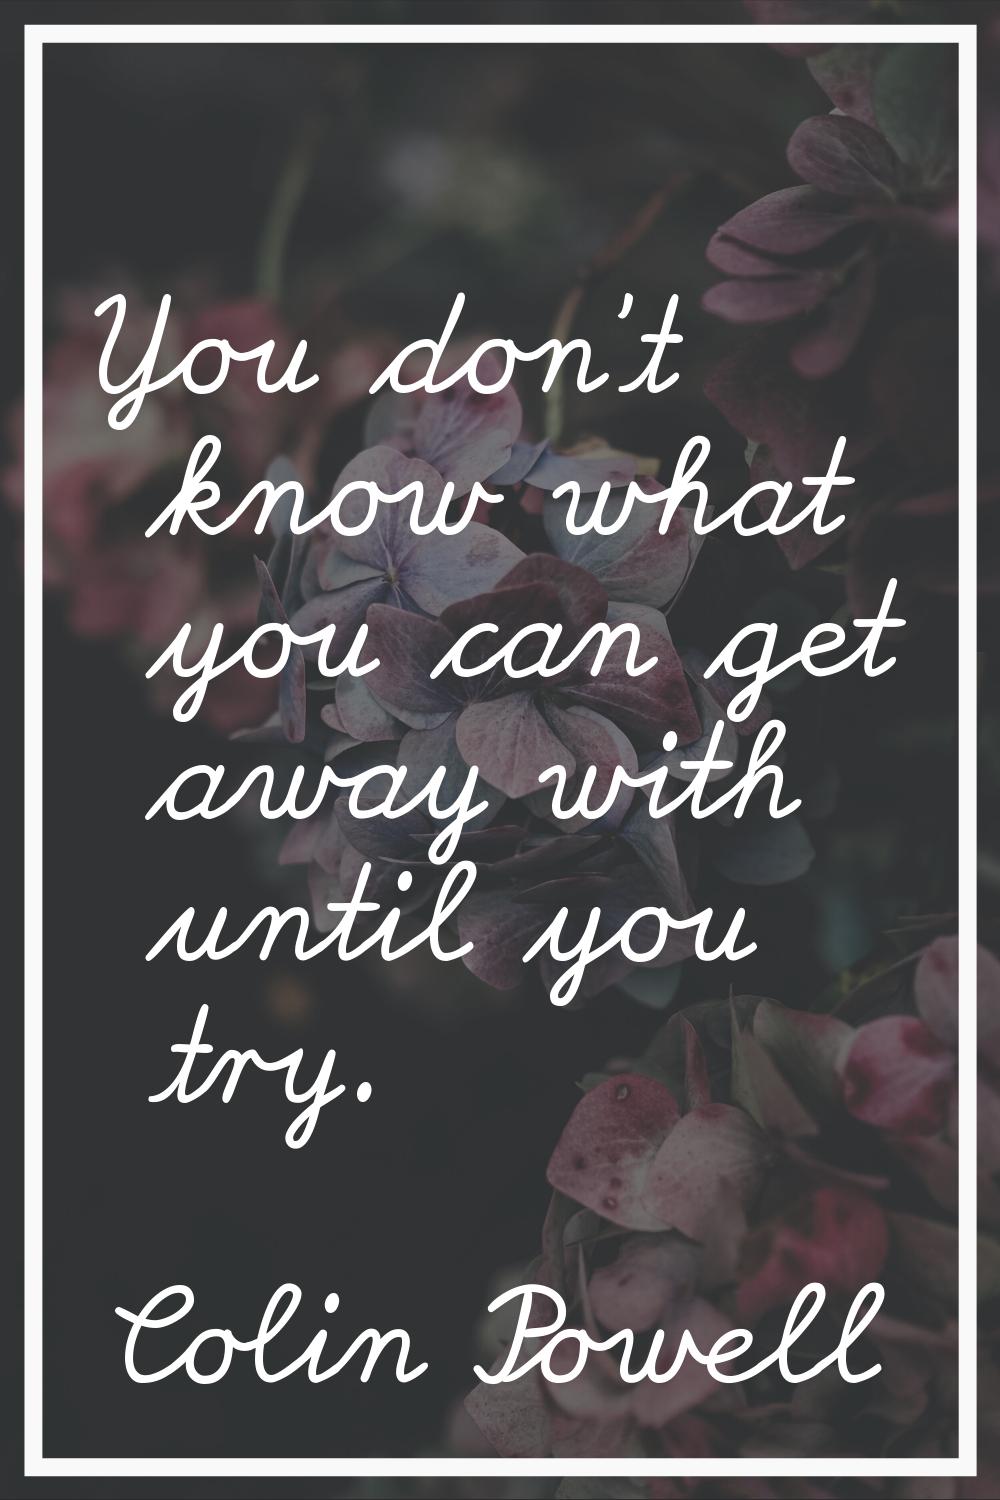 You don't know what you can get away with until you try.